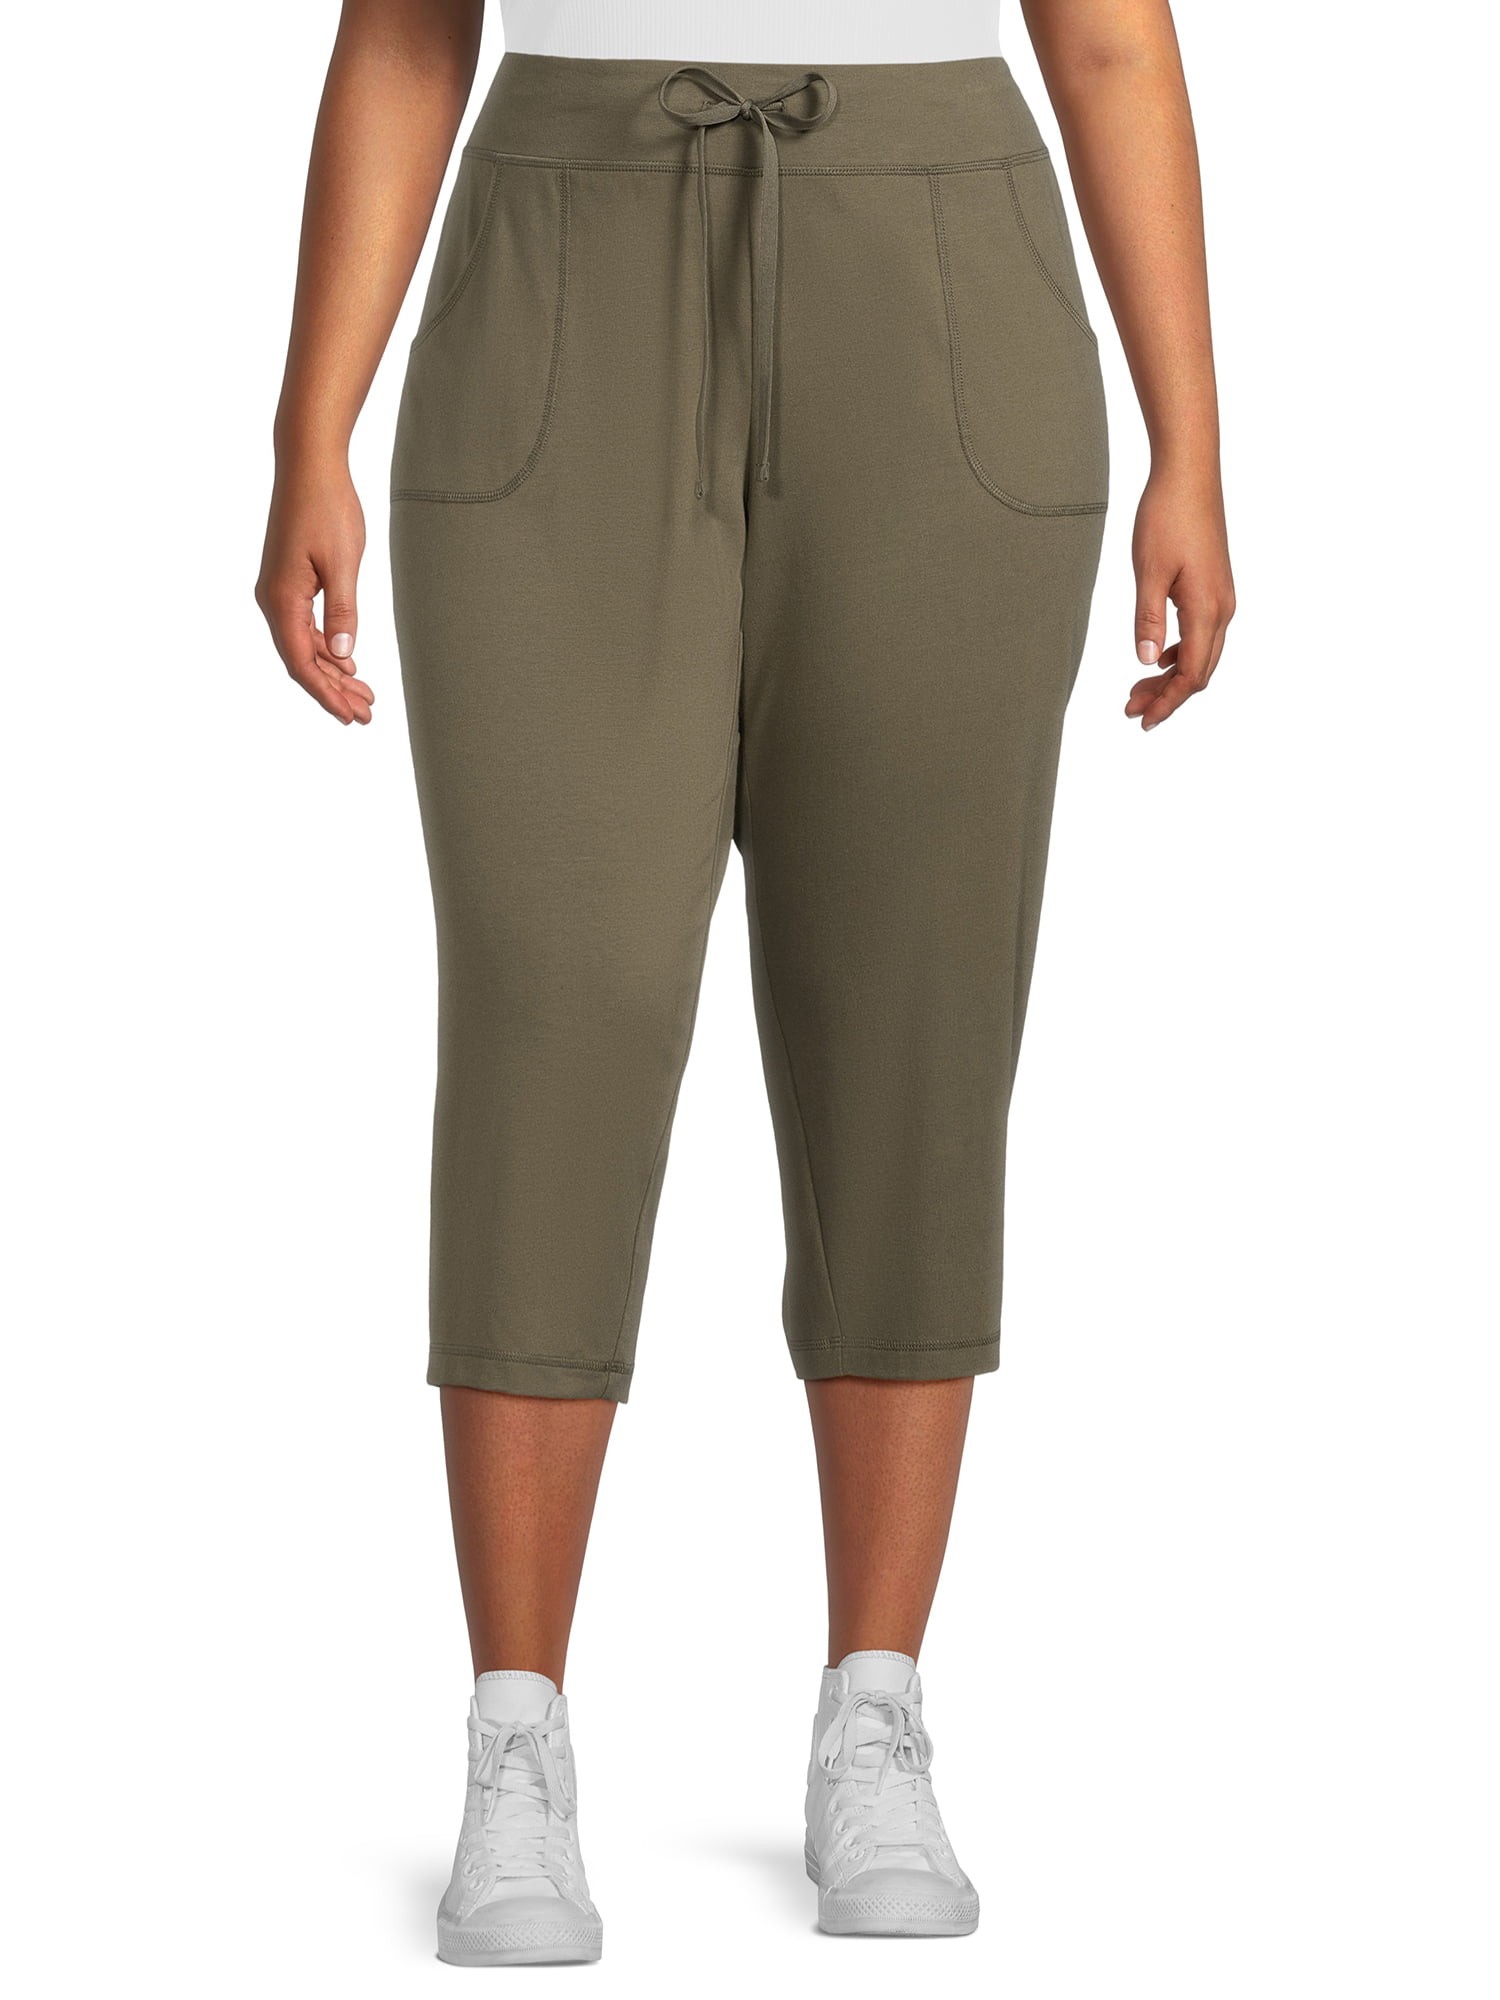 Athletic Works Women's Essential Athleisure Knit Pant Available in